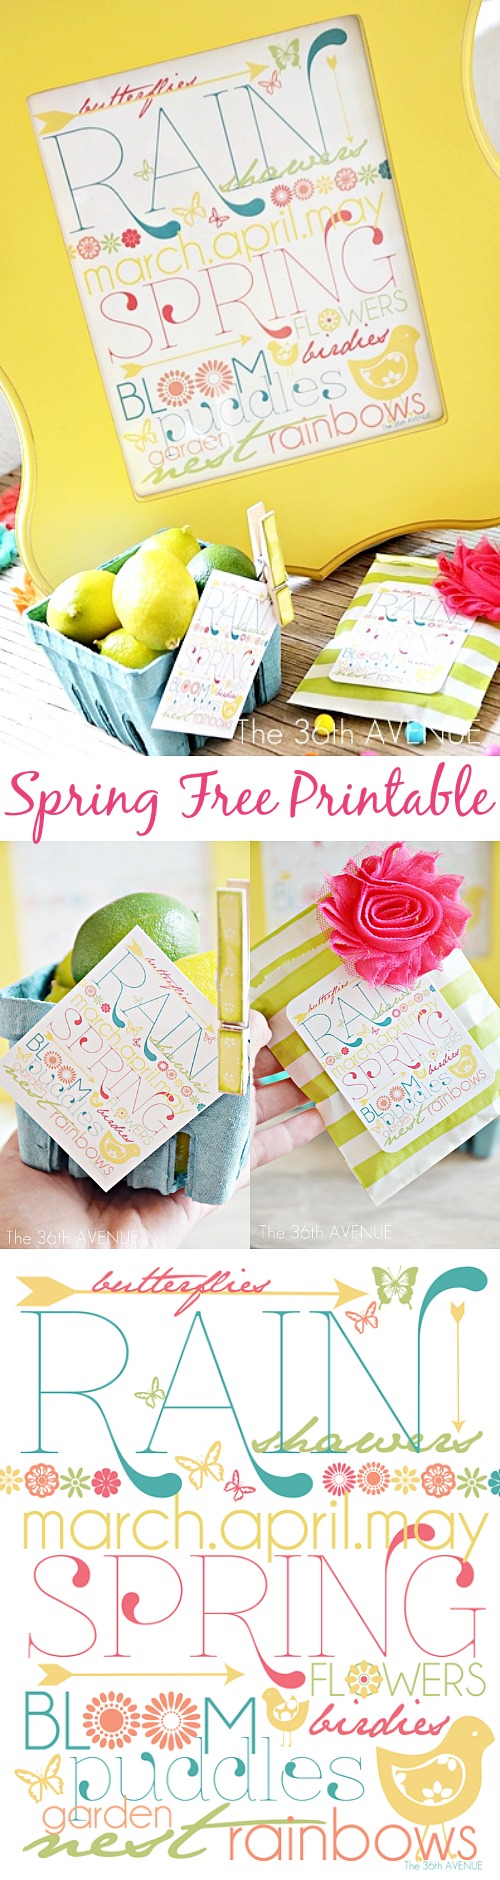 Free Spring Printable Download over at the36thavenue.com Happy Spring!